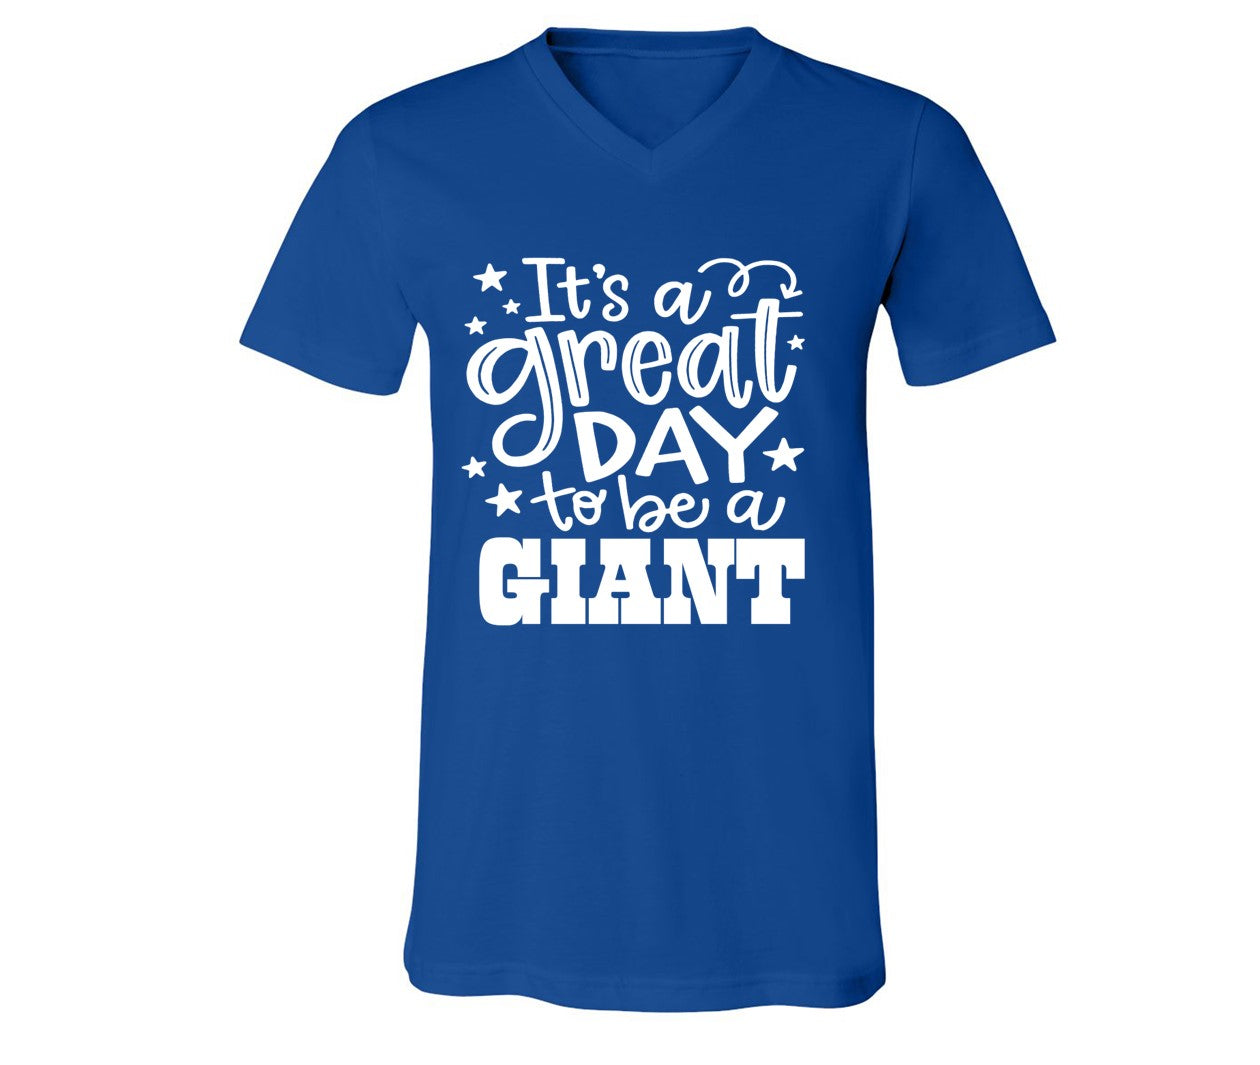 Visitation Giants - It's a Great Day in Blue - Several Styles to Choose From!